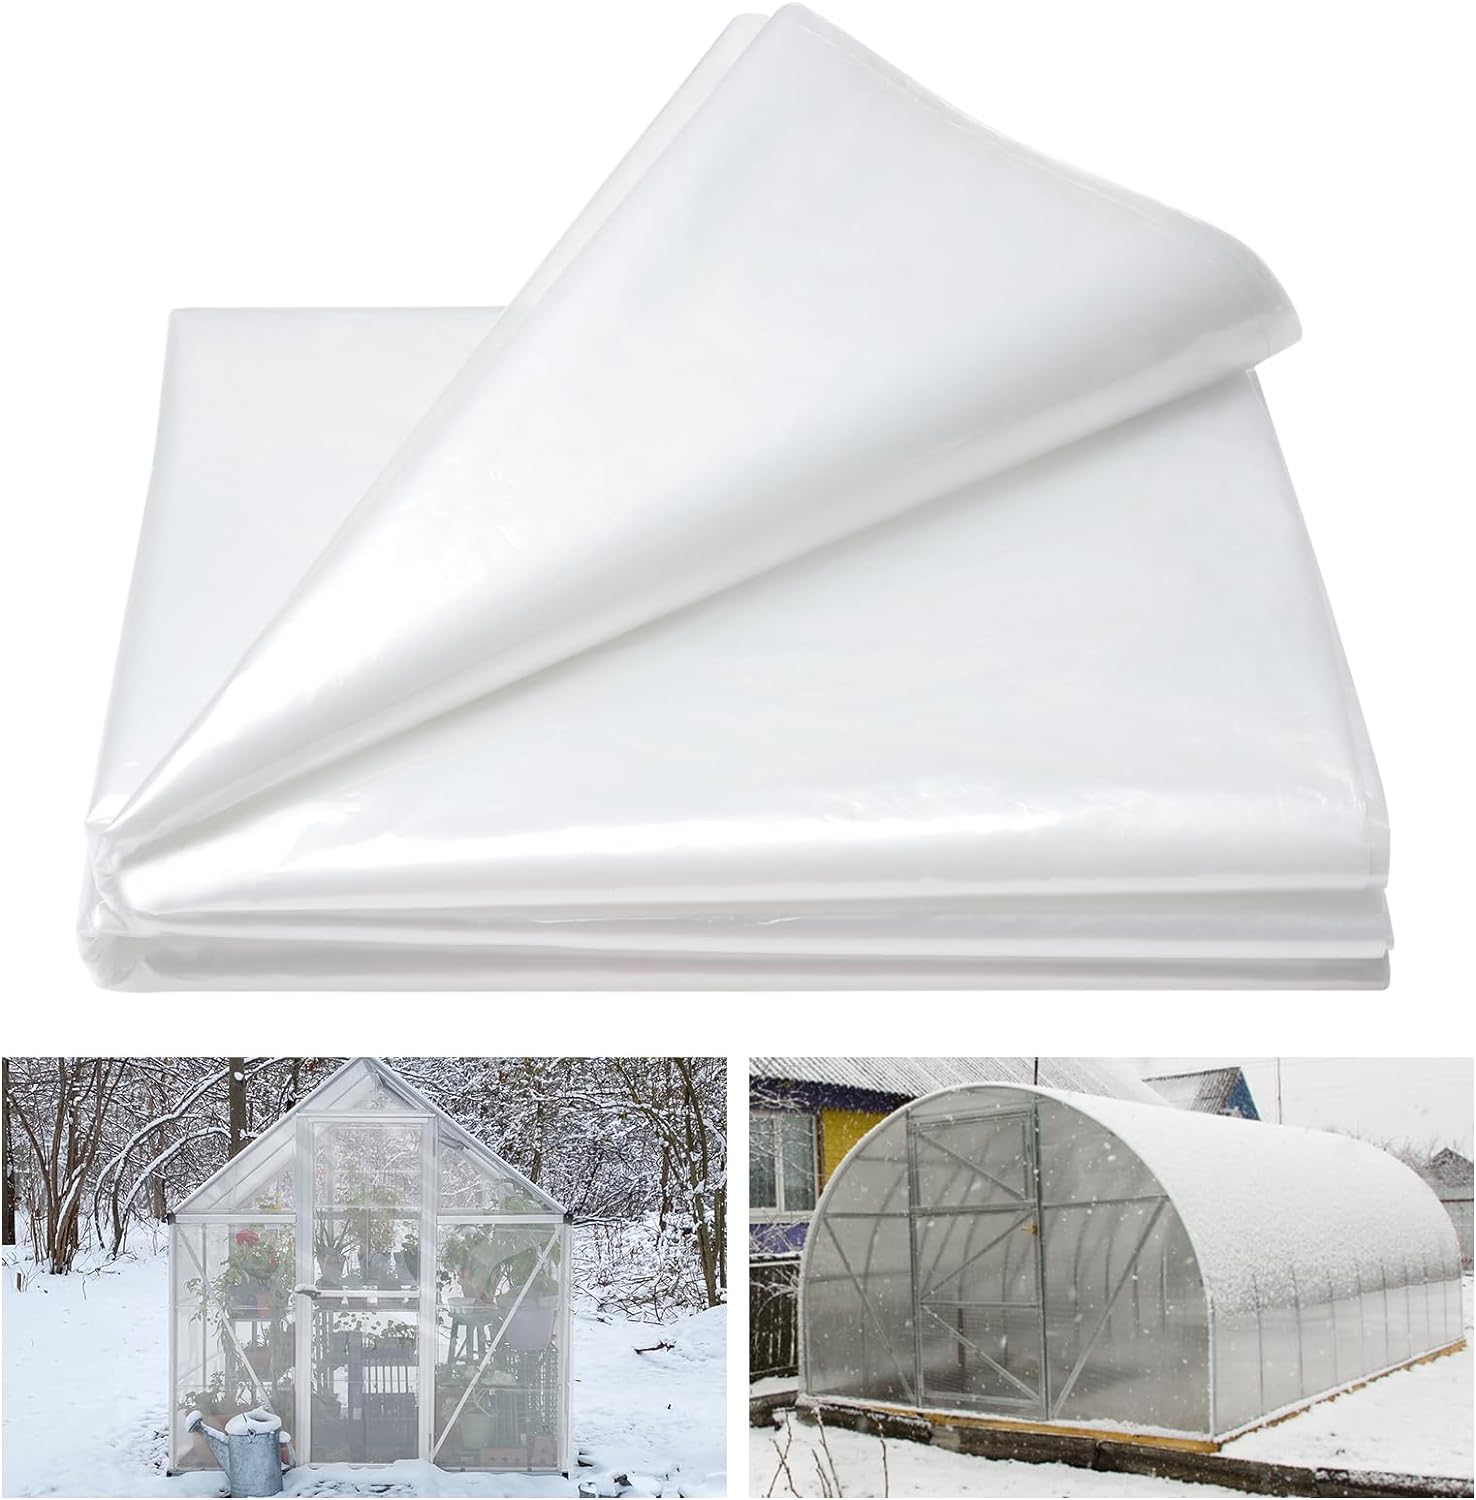 Plant Covers Freeze Protection, 10 x 30ft Durable Plastic Frost Blanket for Winter Rain Snow Weather, Clear Waterproof Floating Row Cover for Outdoors Garden Plants Vegetables Crops (6 Mil Thickness)